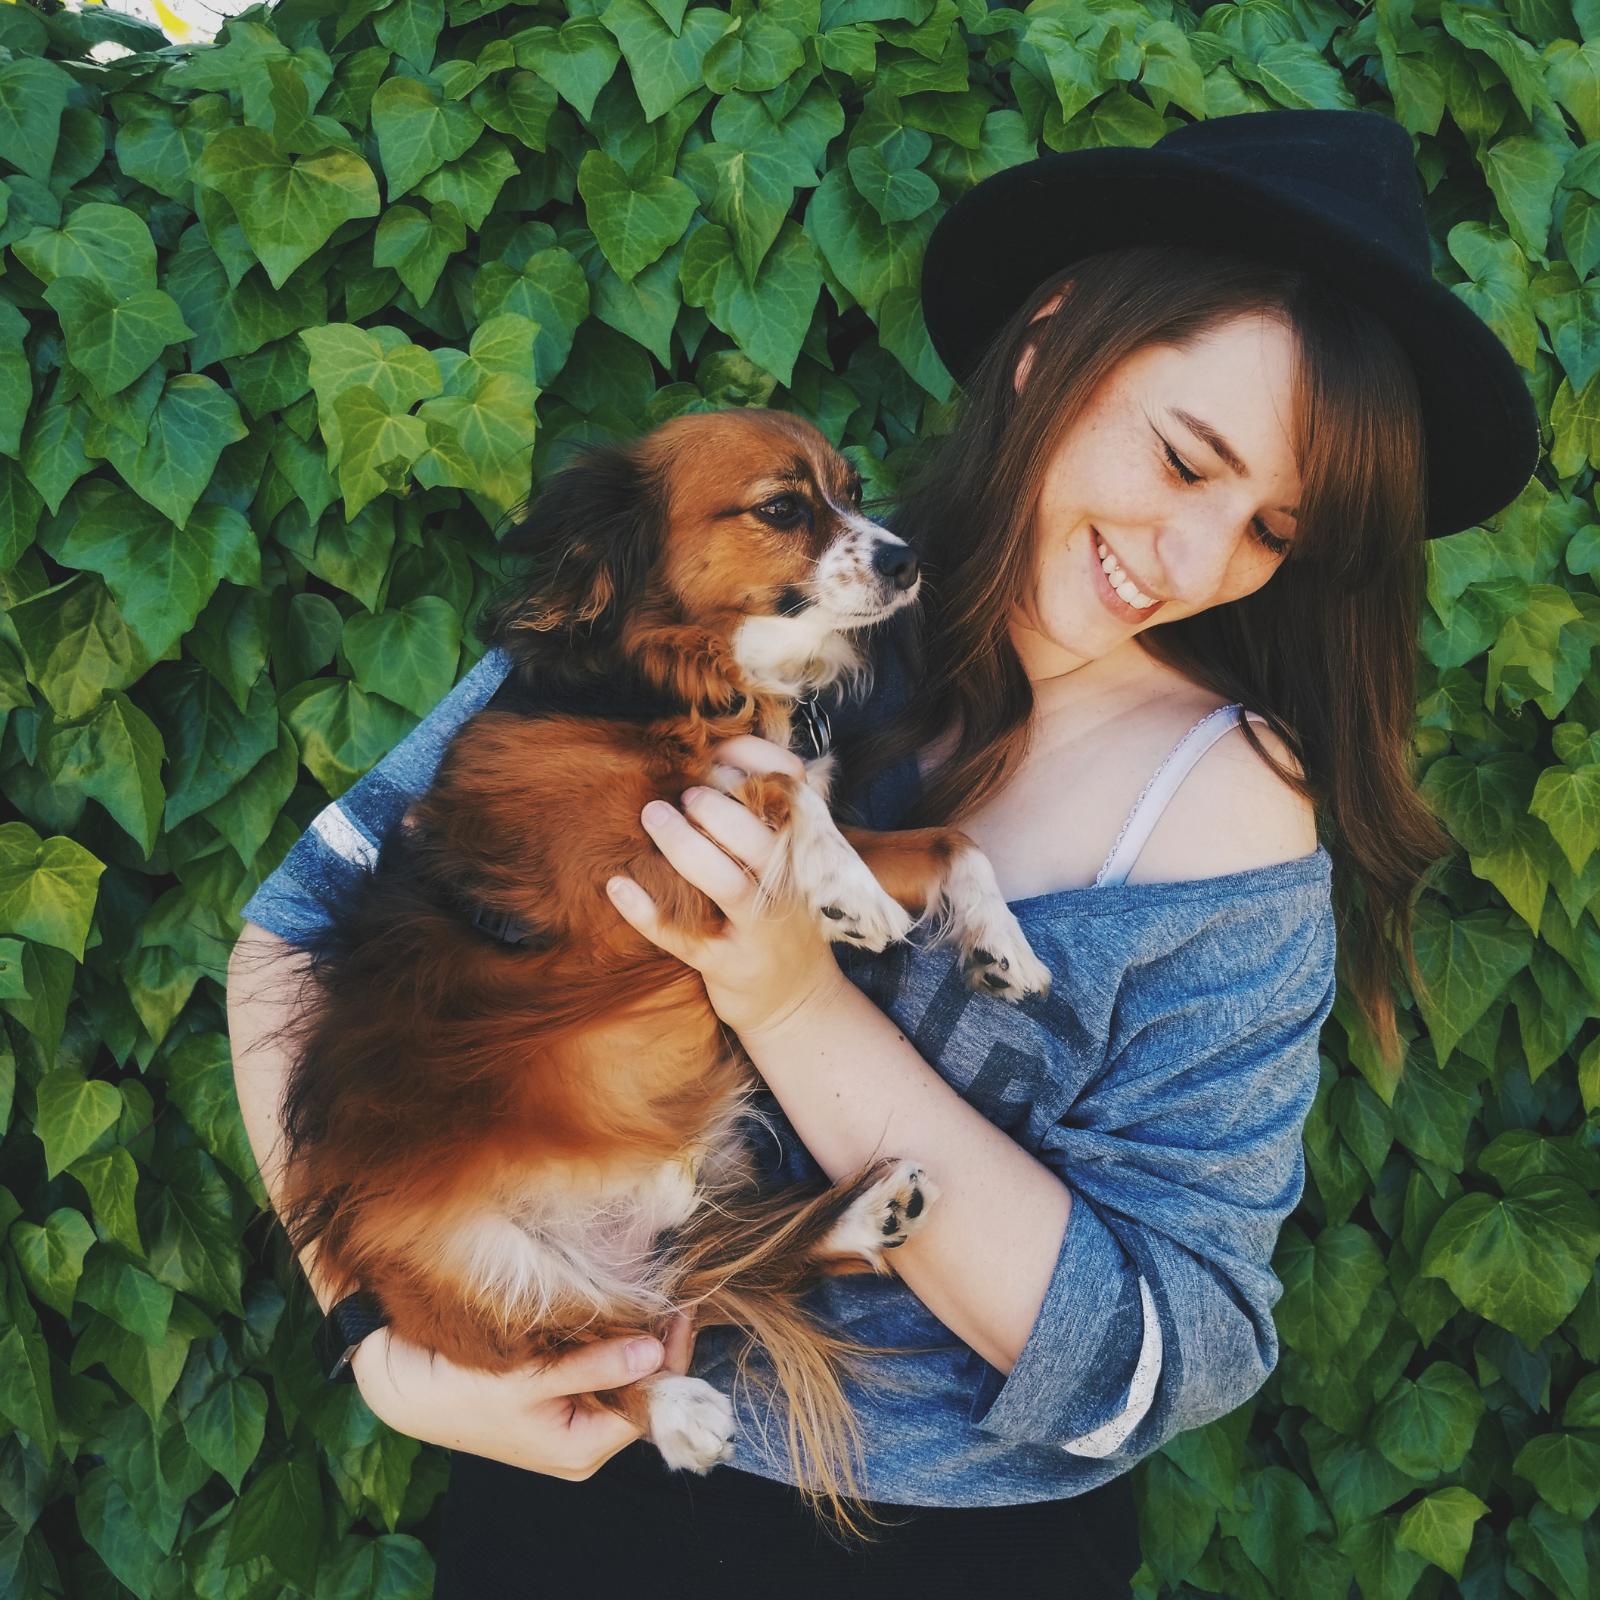 A girl smiling, holding her dog